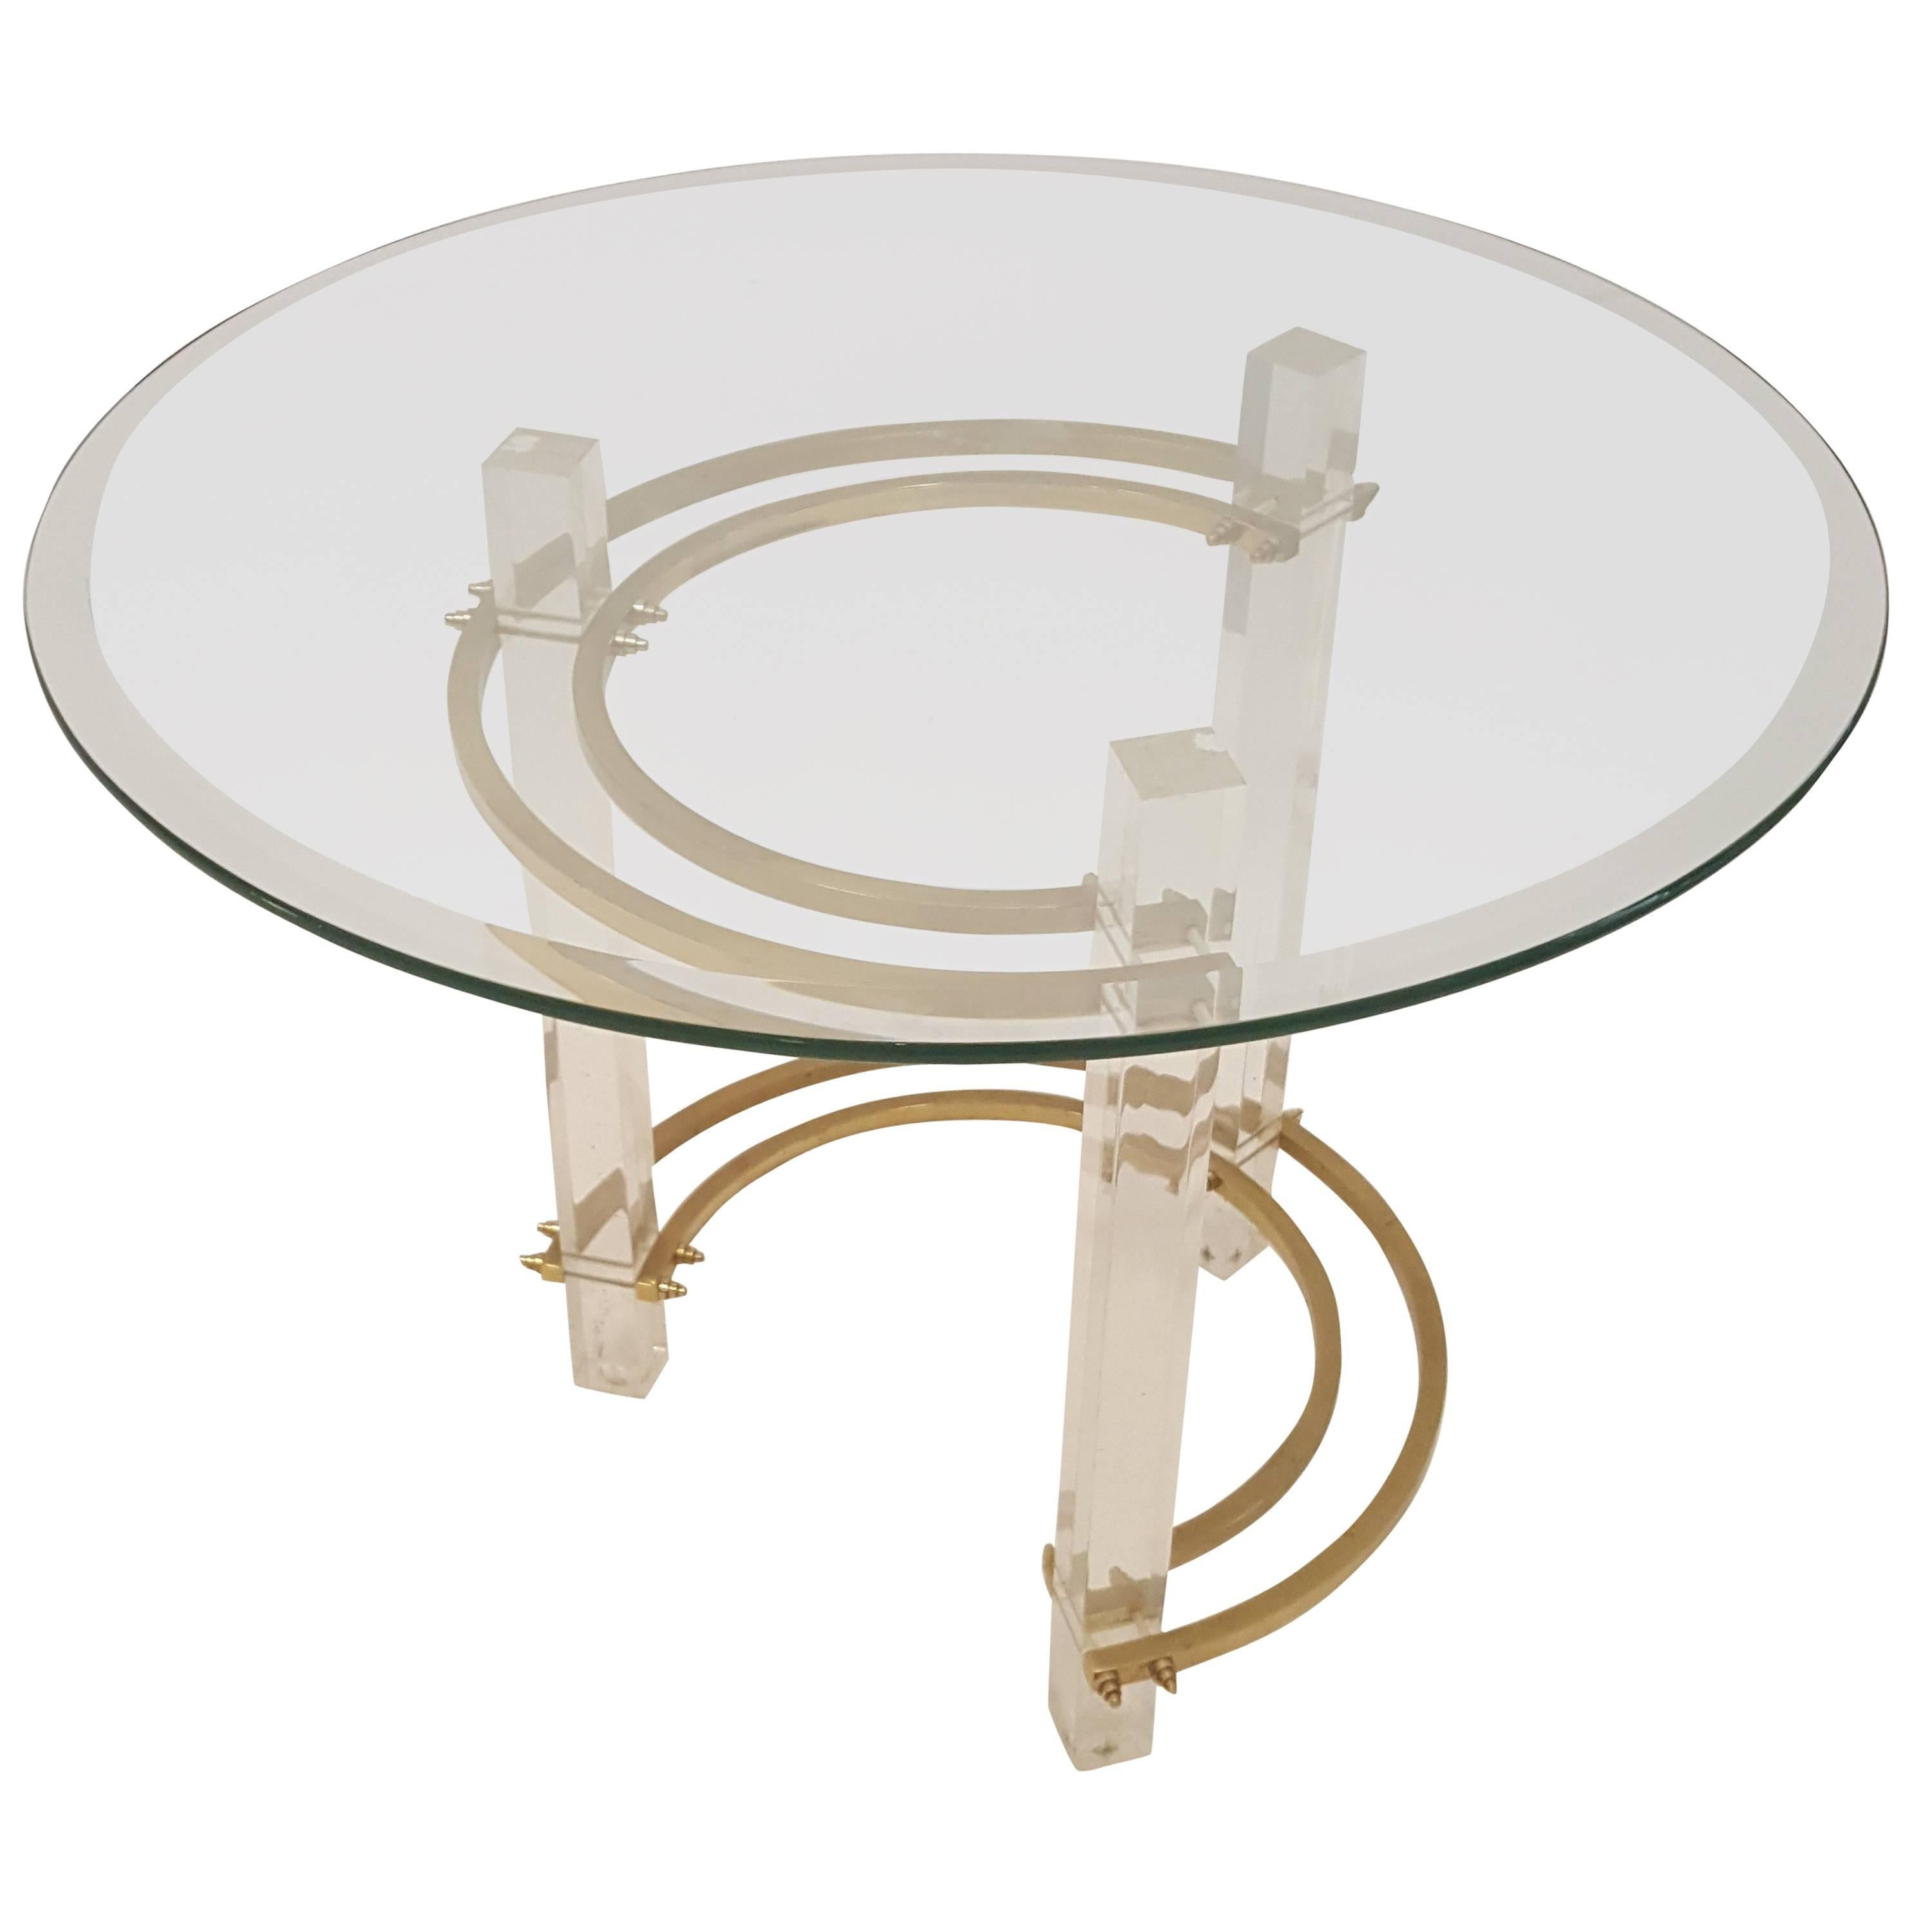 Charles hollis Jones Style Lucite and Brass Side Table For Sale